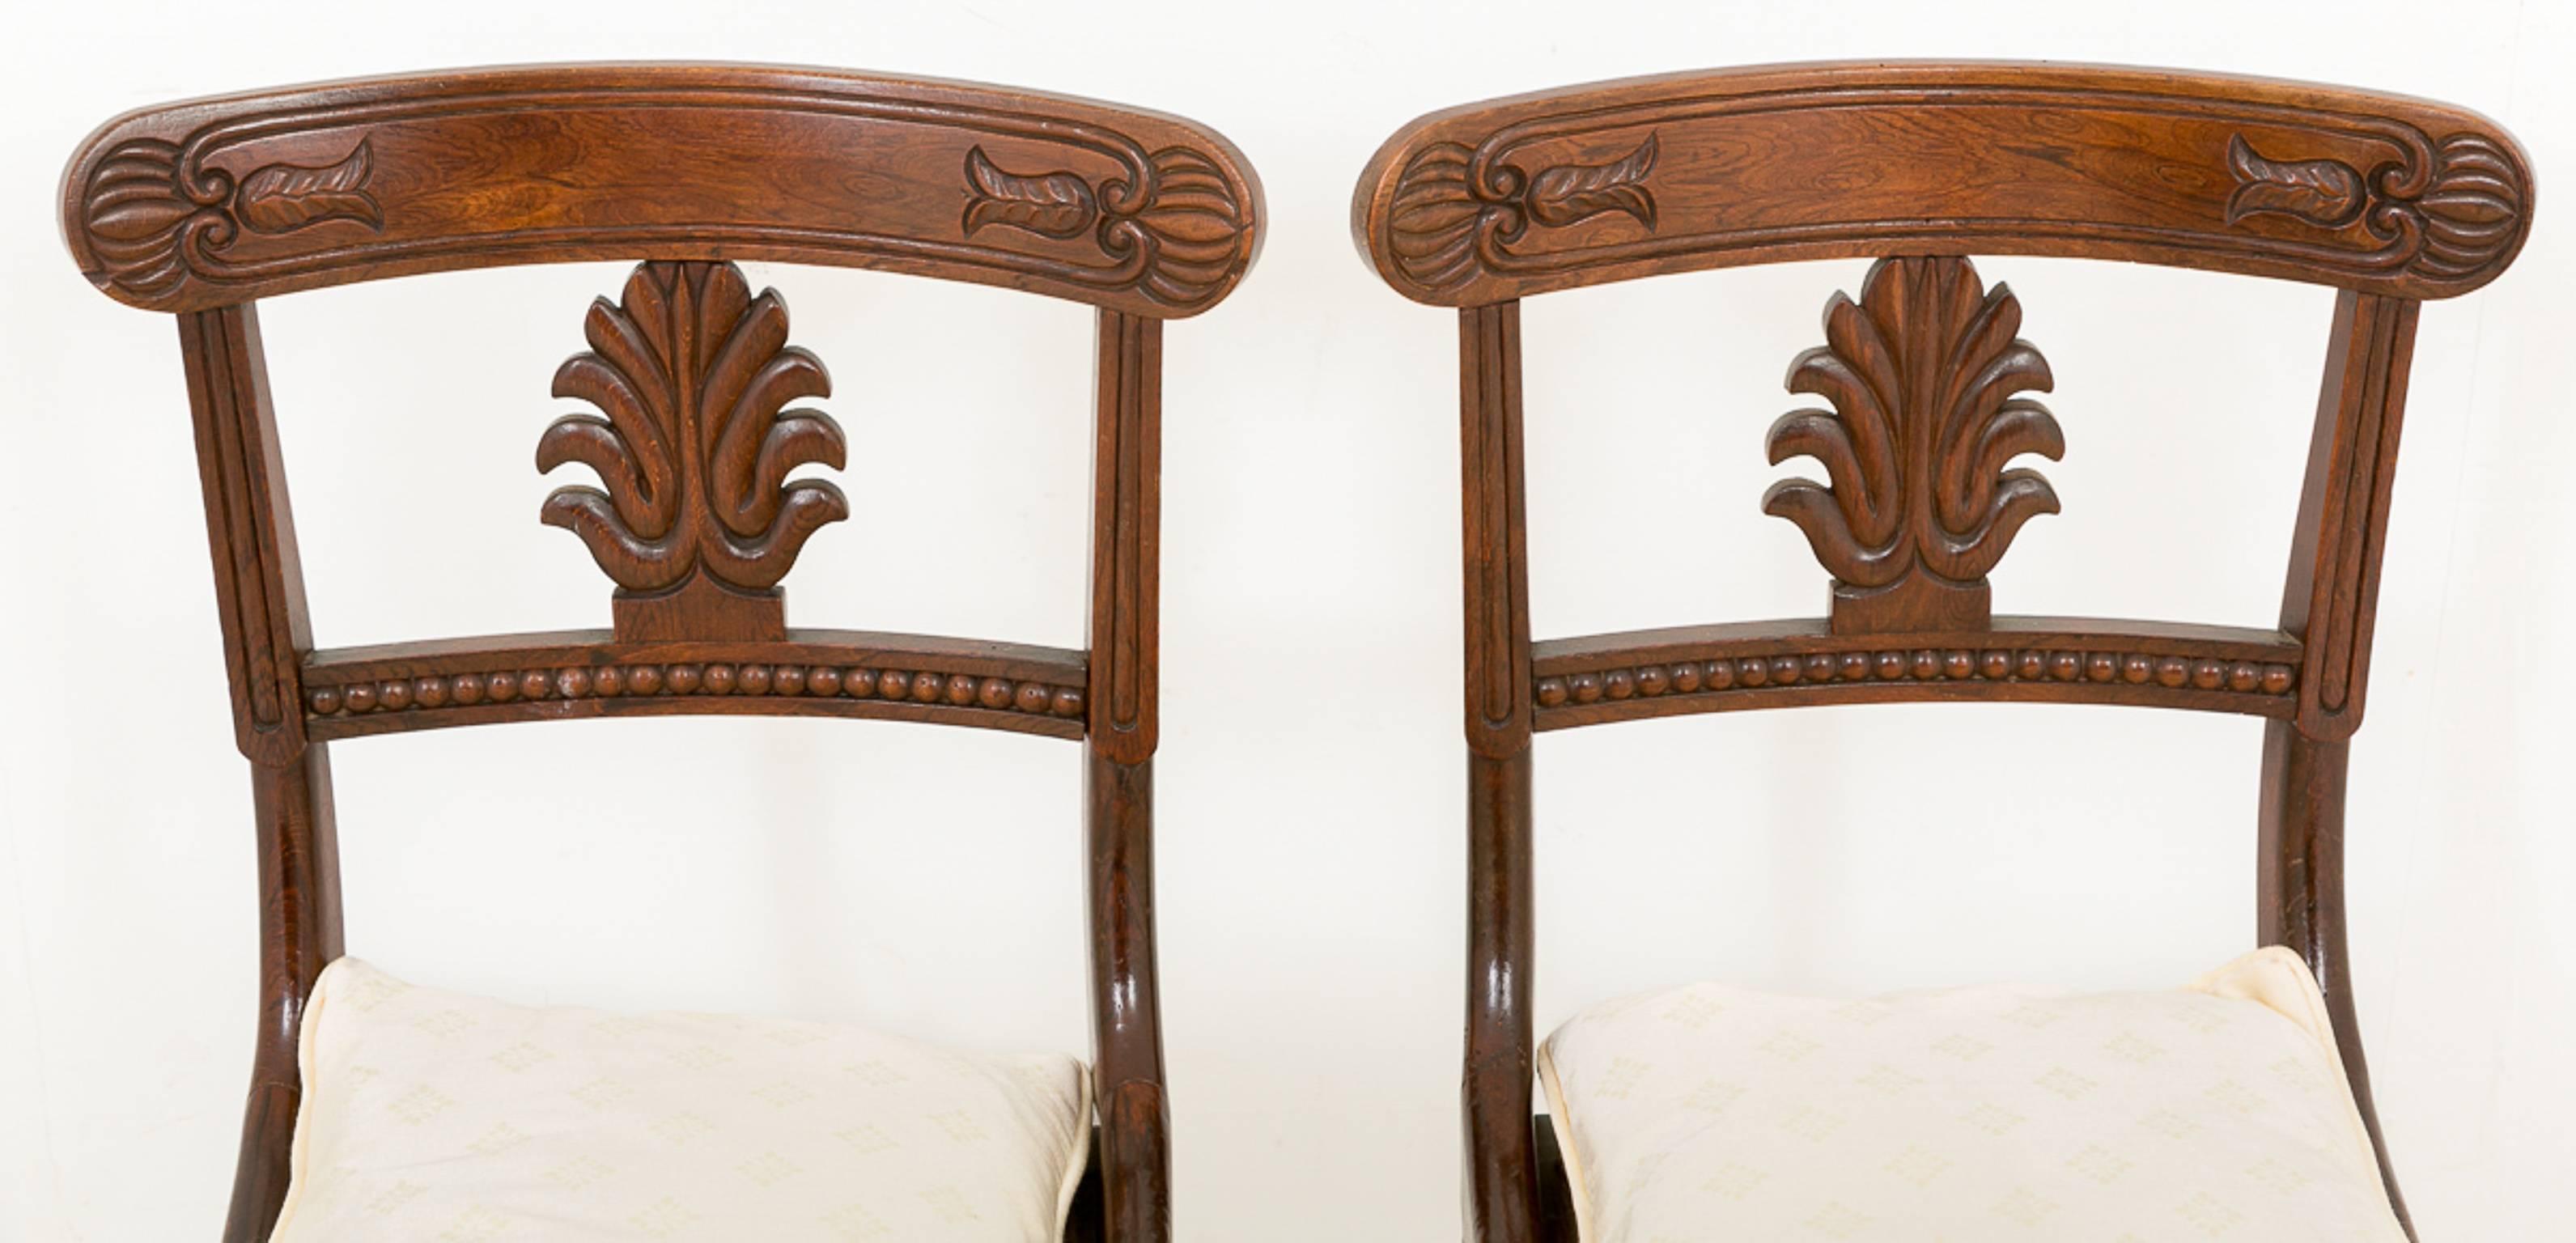 Pair of Regency Simulated Rosewood and Cane Window Seats In Good Condition For Sale In Norwich, Norfolk